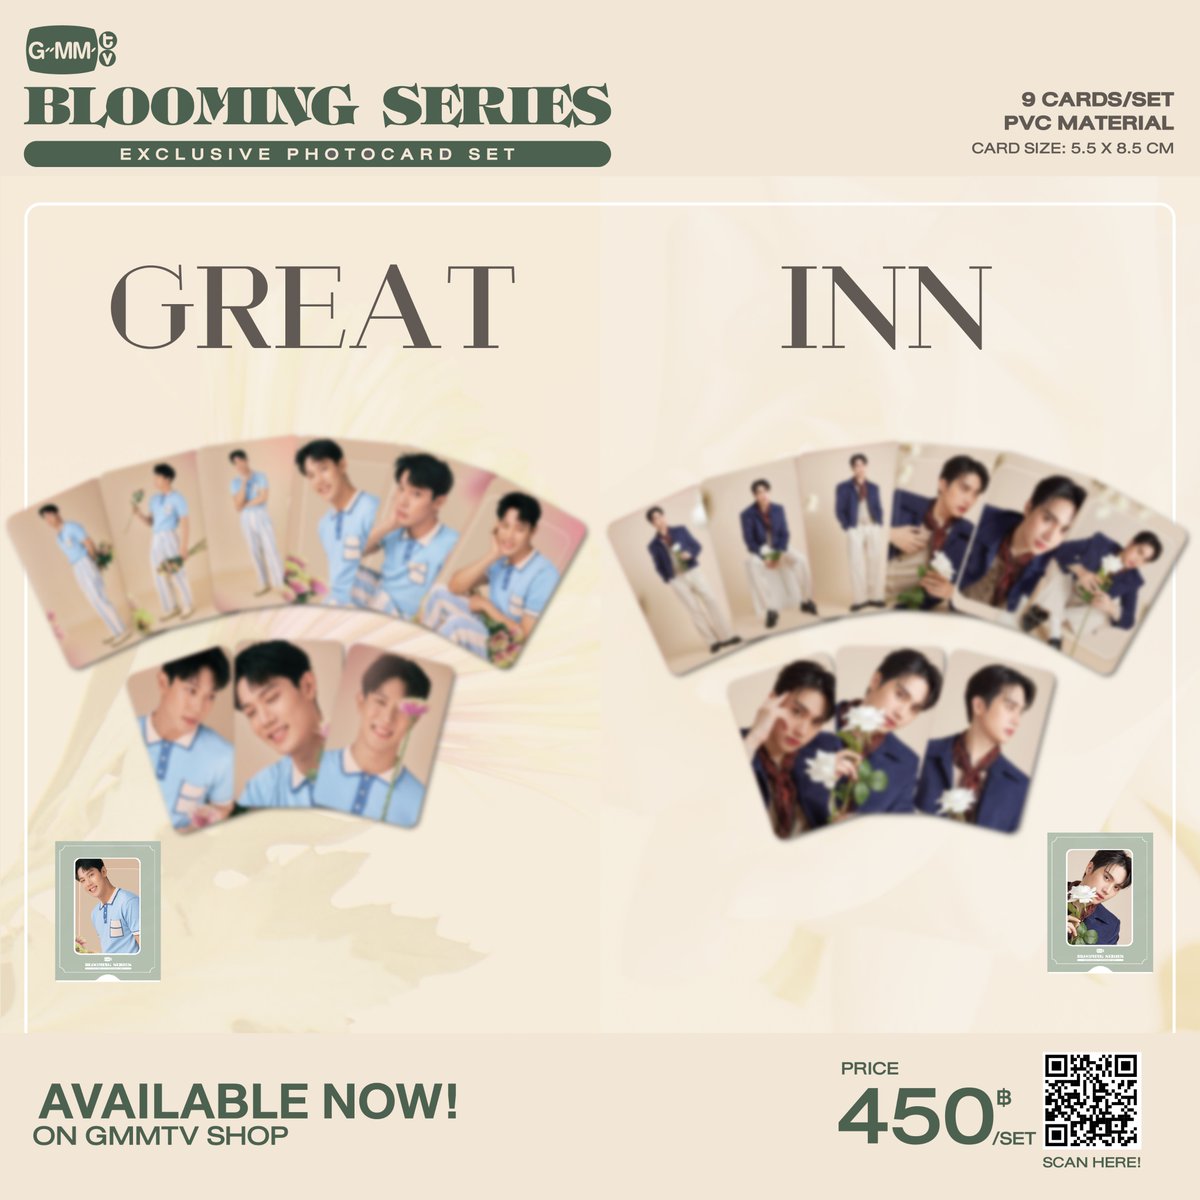 Great and Inn in GMMTV BLOOMING SERIES EXCLUSIVE PHOTOCARD SET are irresistibly handsome and lovely. GREAT | BLOOMING SERIES EXCLUSIVE PHOTOCARD SET INN | BLOOMING SERIES EXCLUSIVE PHOTOCARD SET gmm-tv.com/shop/photocard #WandeeGooddayEP2 #grtsp #innsarin #GMMTV